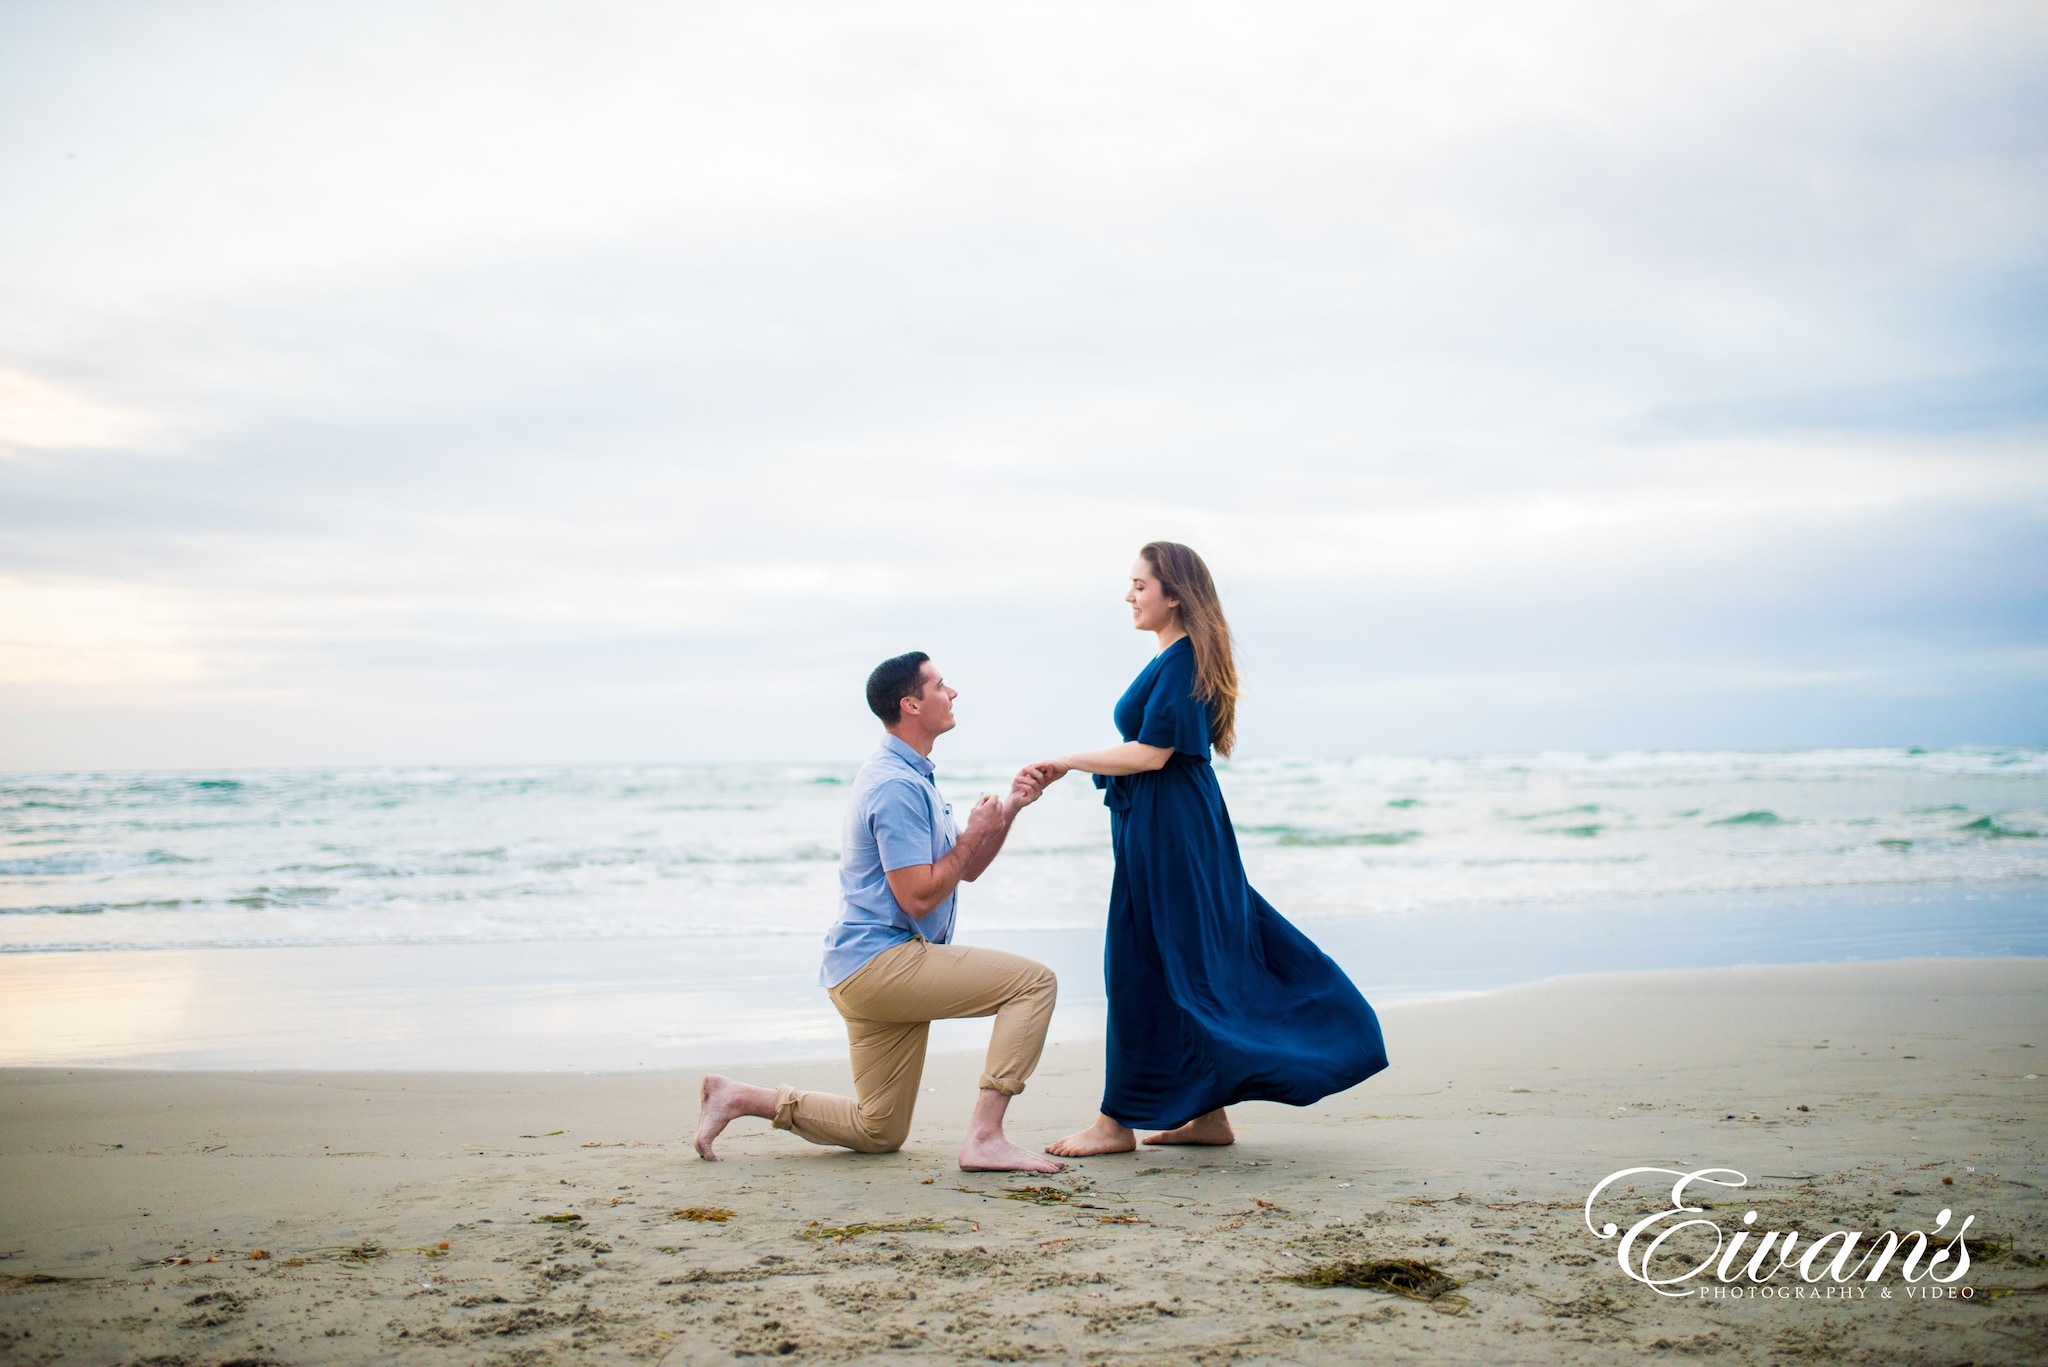 Engagement Photos At The Beach 004